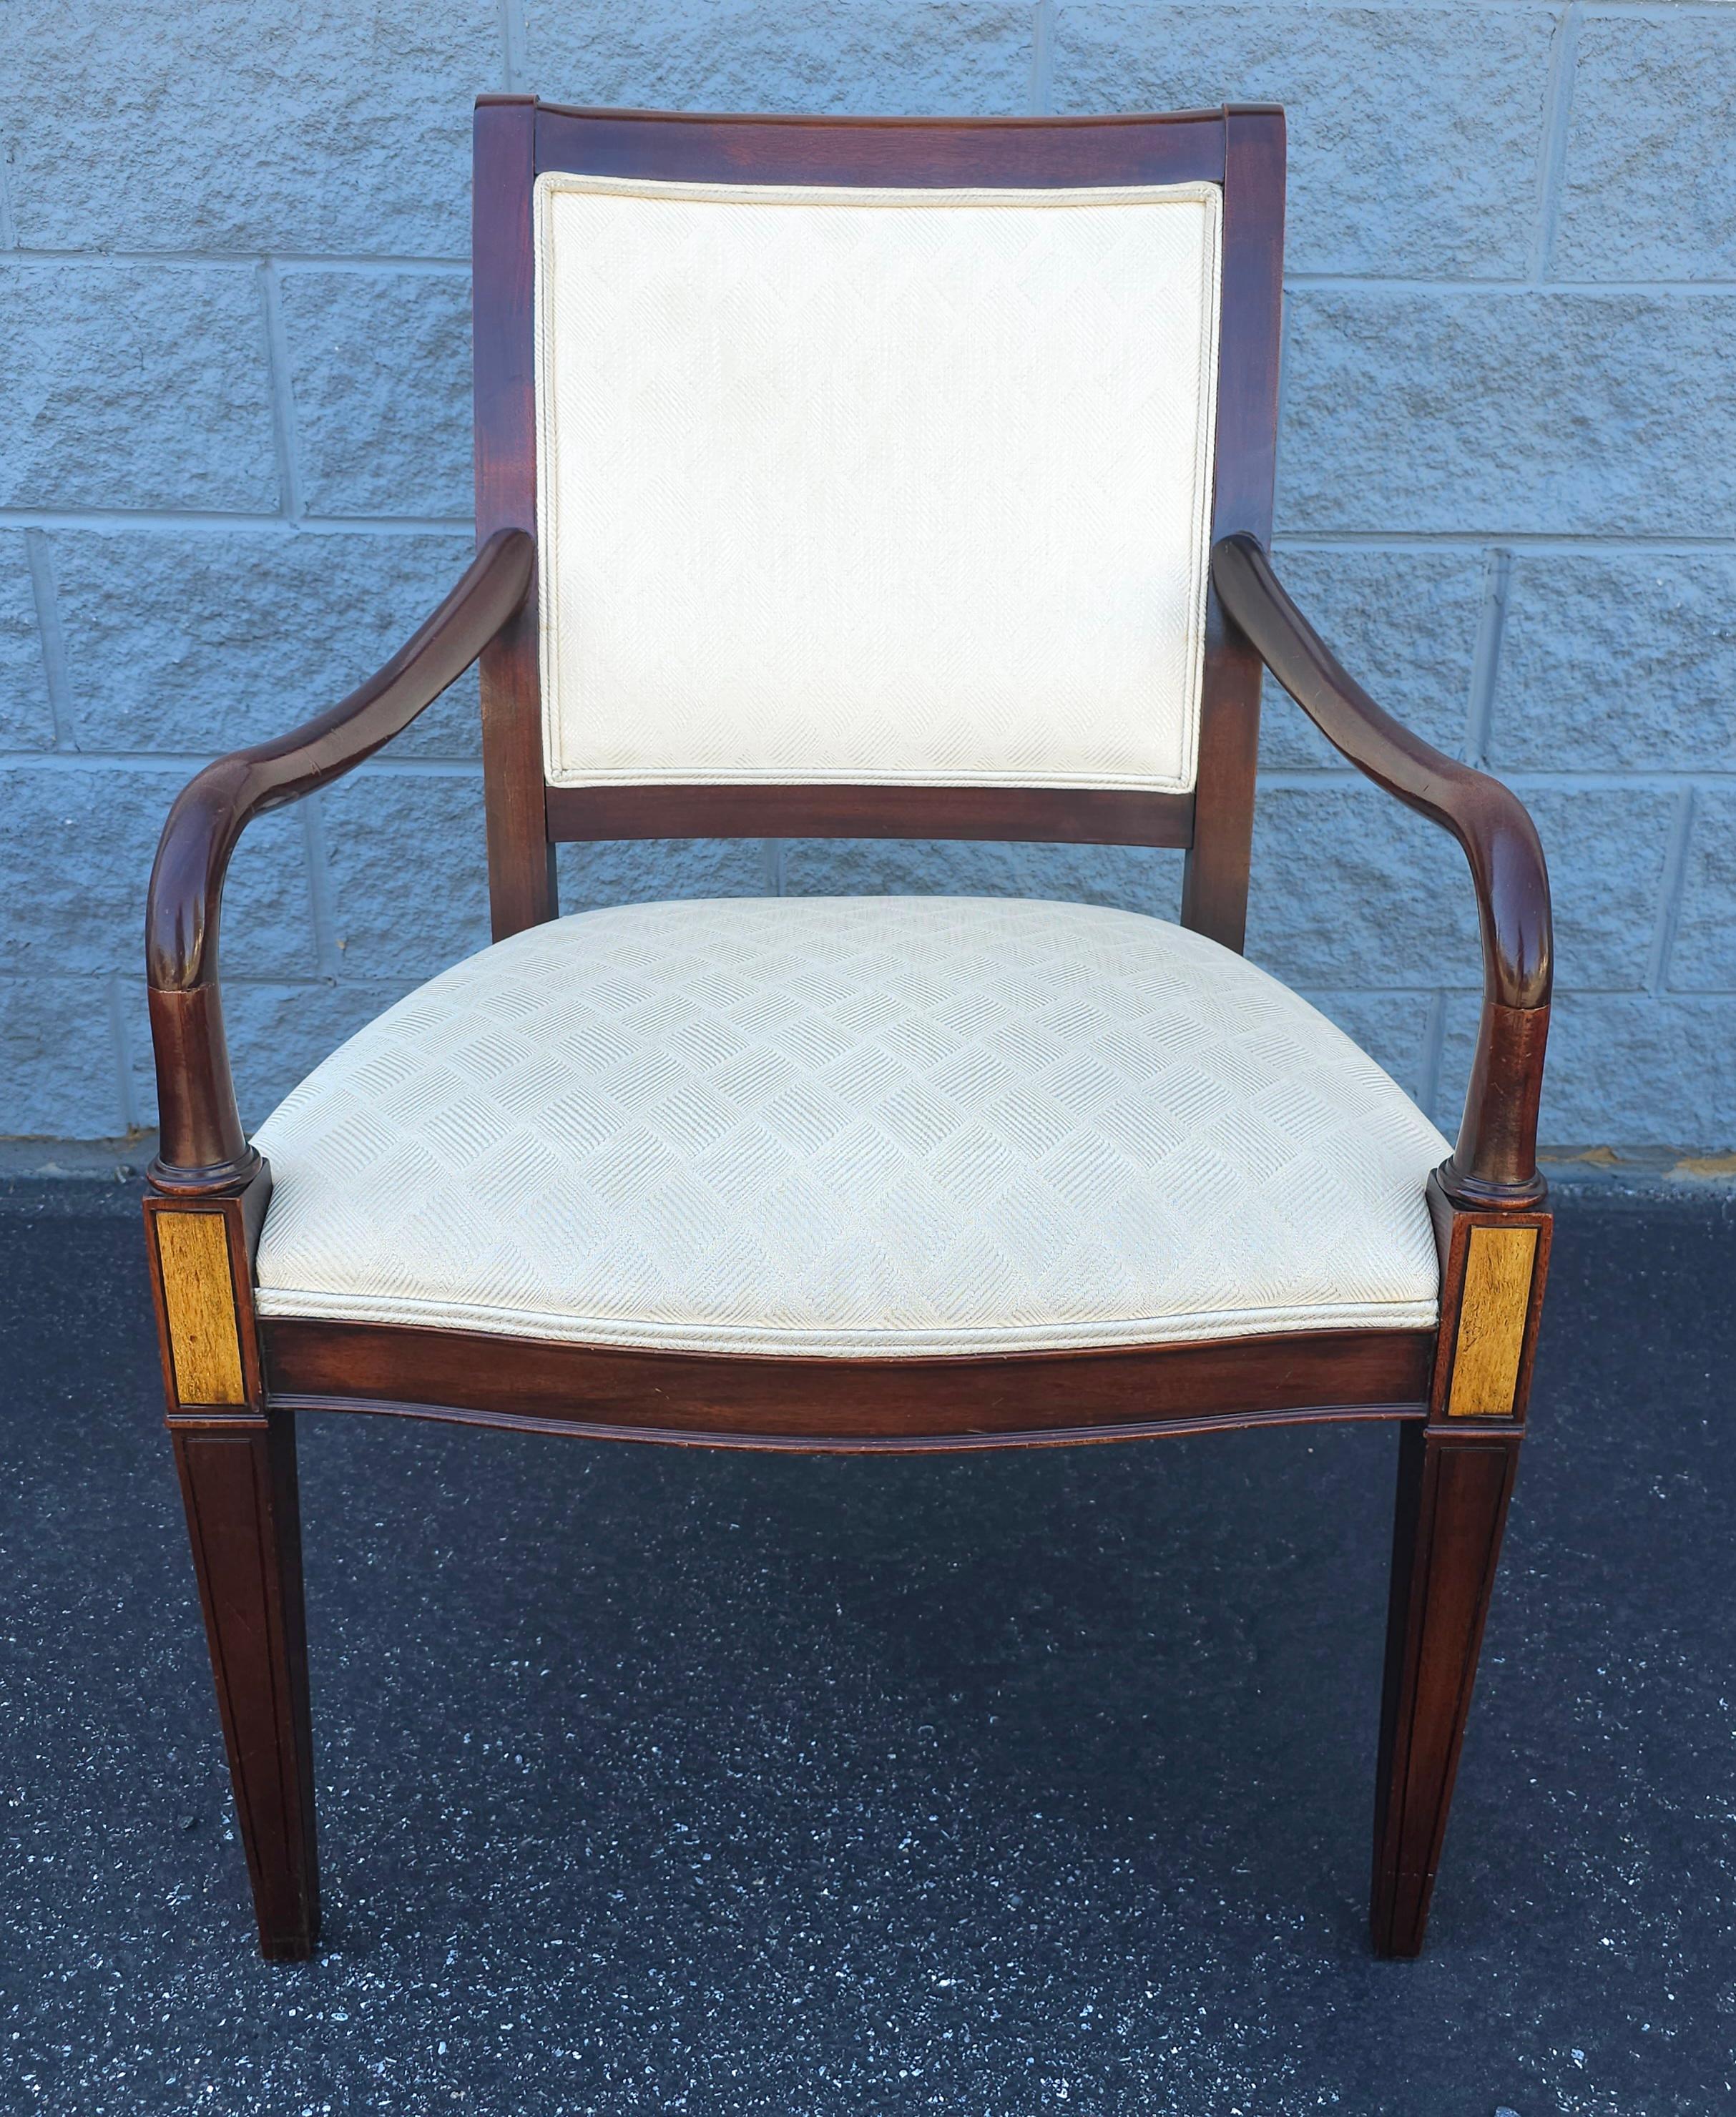 Inlay 20th C. Hickory Chair Federal Style Mahogany Inlaid and Upholstered Arm Chair For Sale